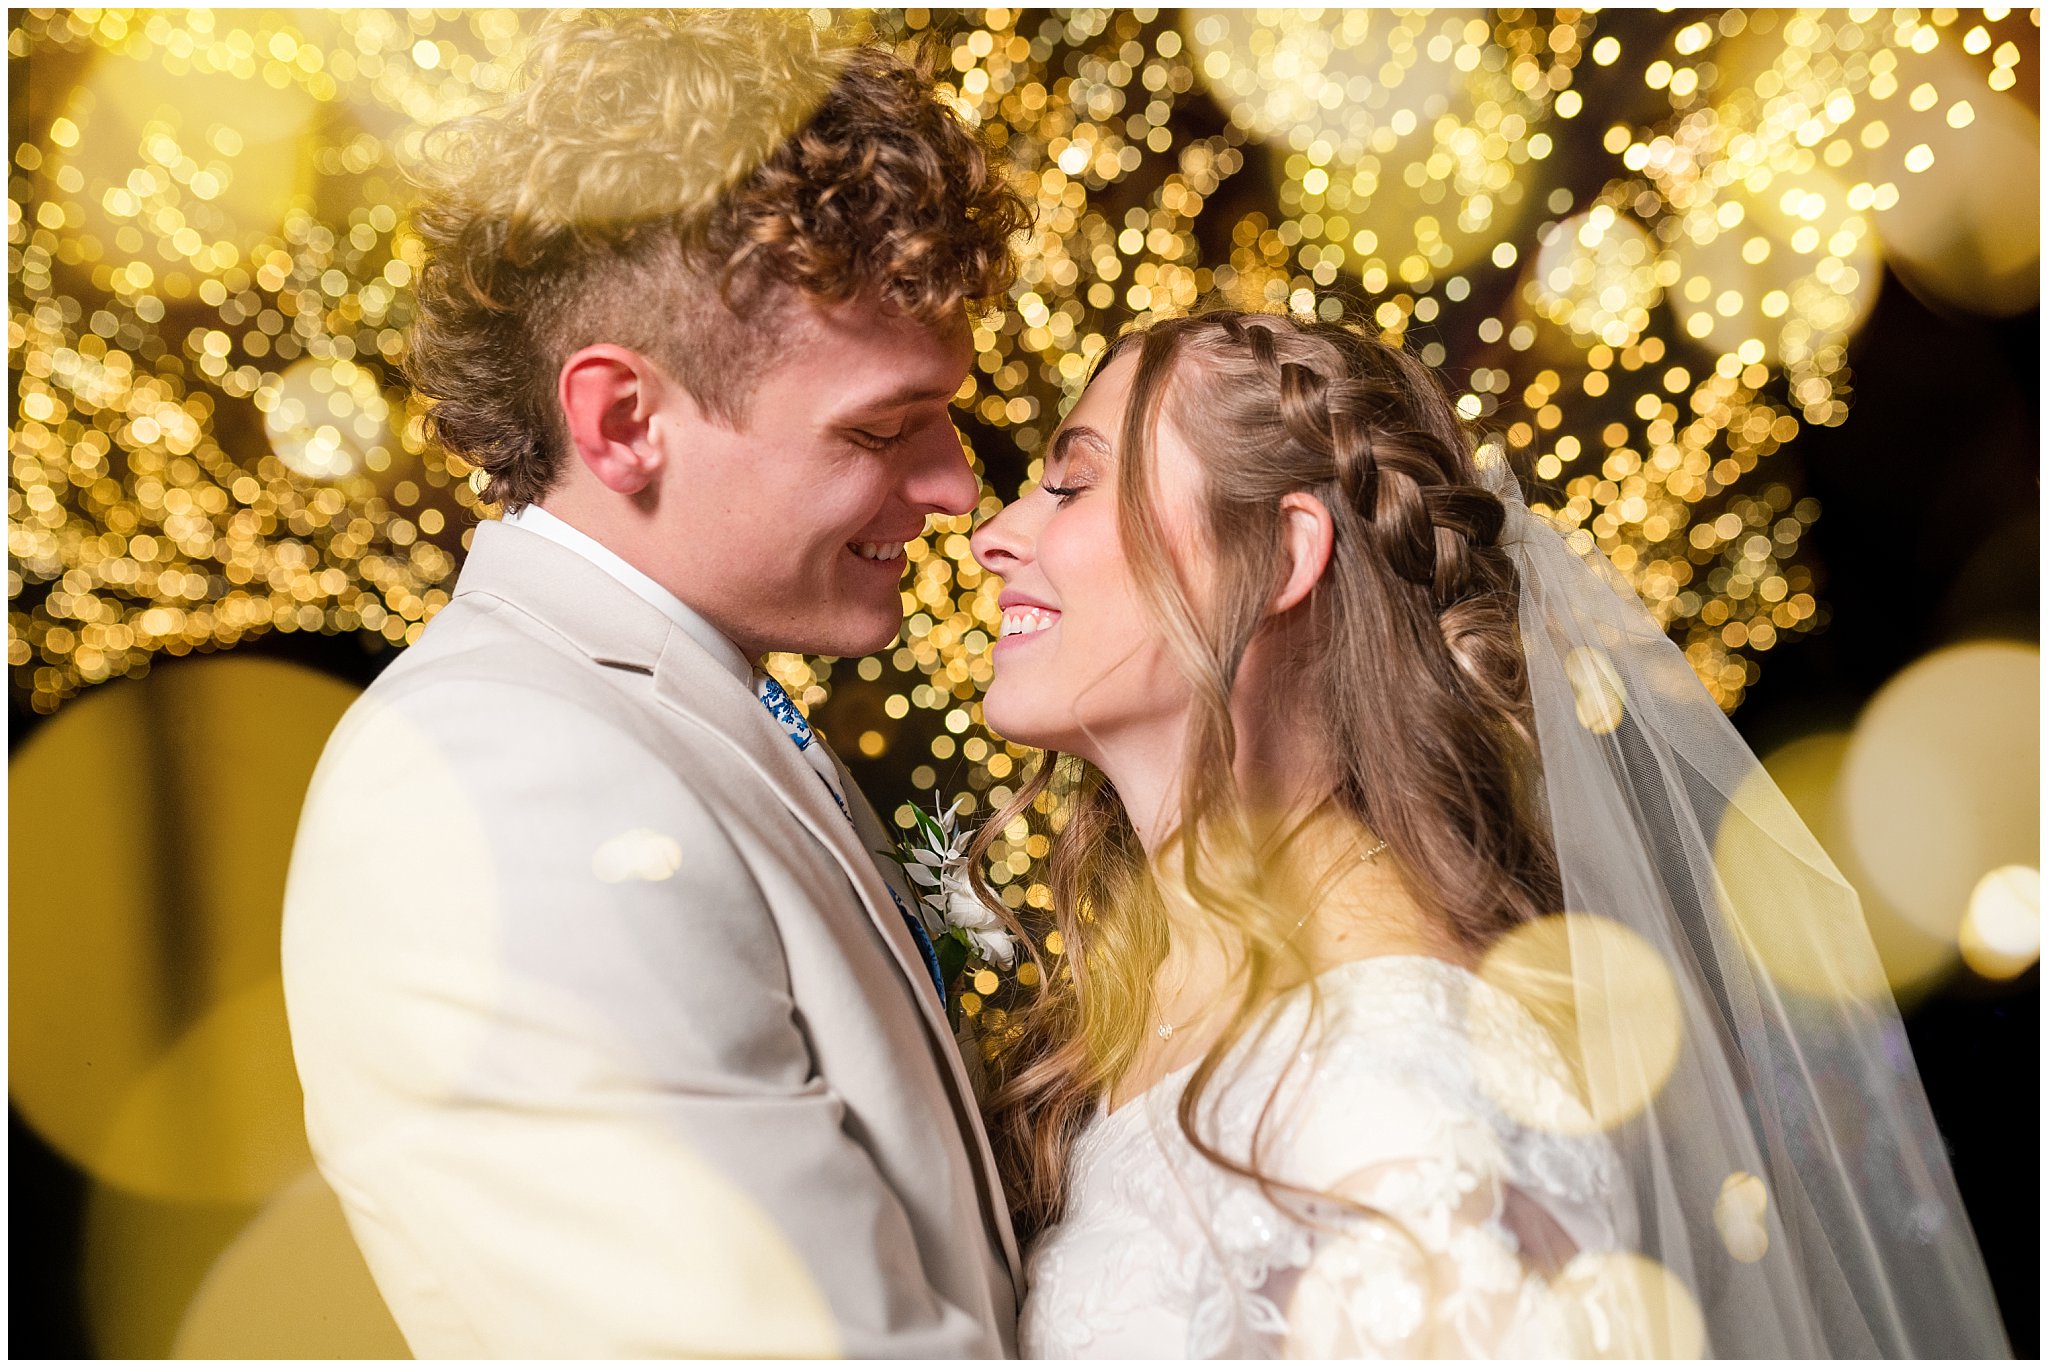 Bride and groom portraits with Christmas lights at the Tree of Life at Draper Park. Groom in cream colored suit with blue floral tie and bride with lace dress and white floral bouquet. | Oquirrh Mountain Temple and Draper Day Barn Winter Wedding | Jessie and Dallin Photography